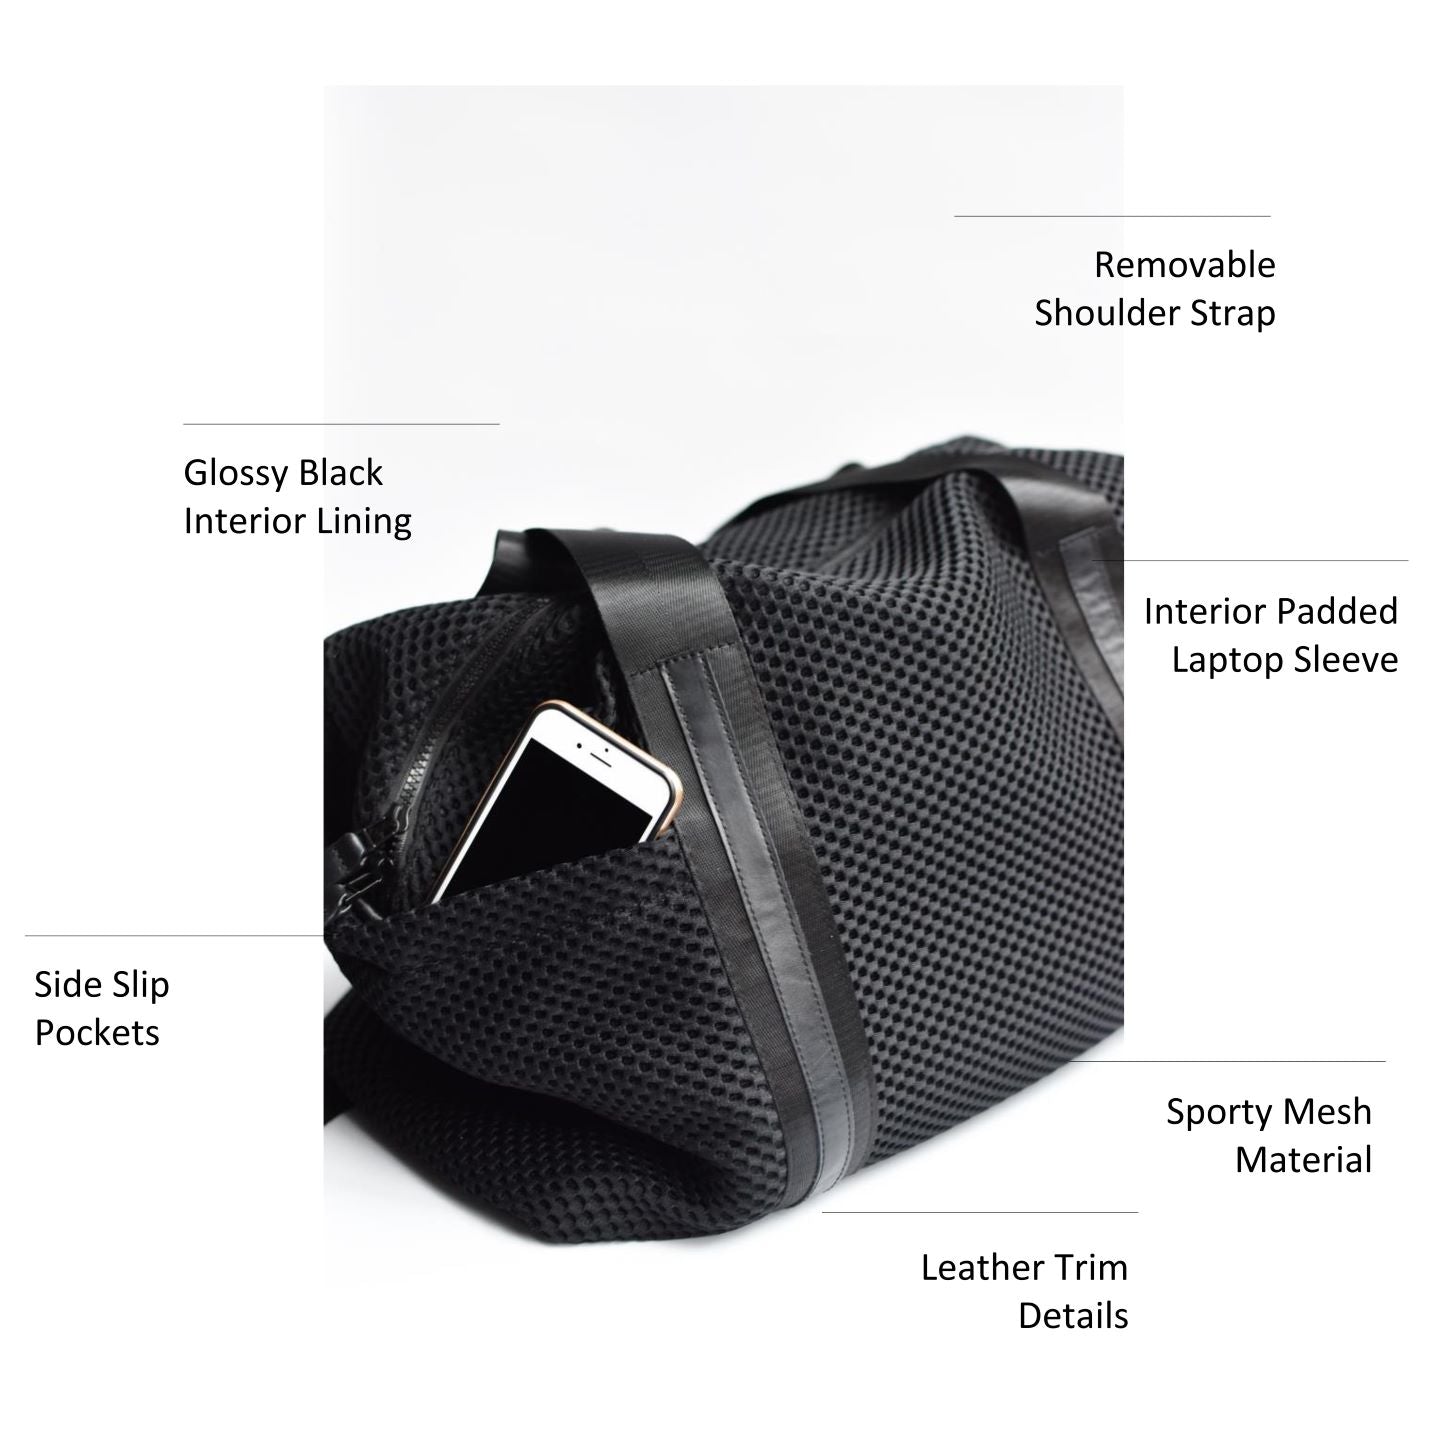 Black mesh duffel bag with leather trim details and black glossy liner.